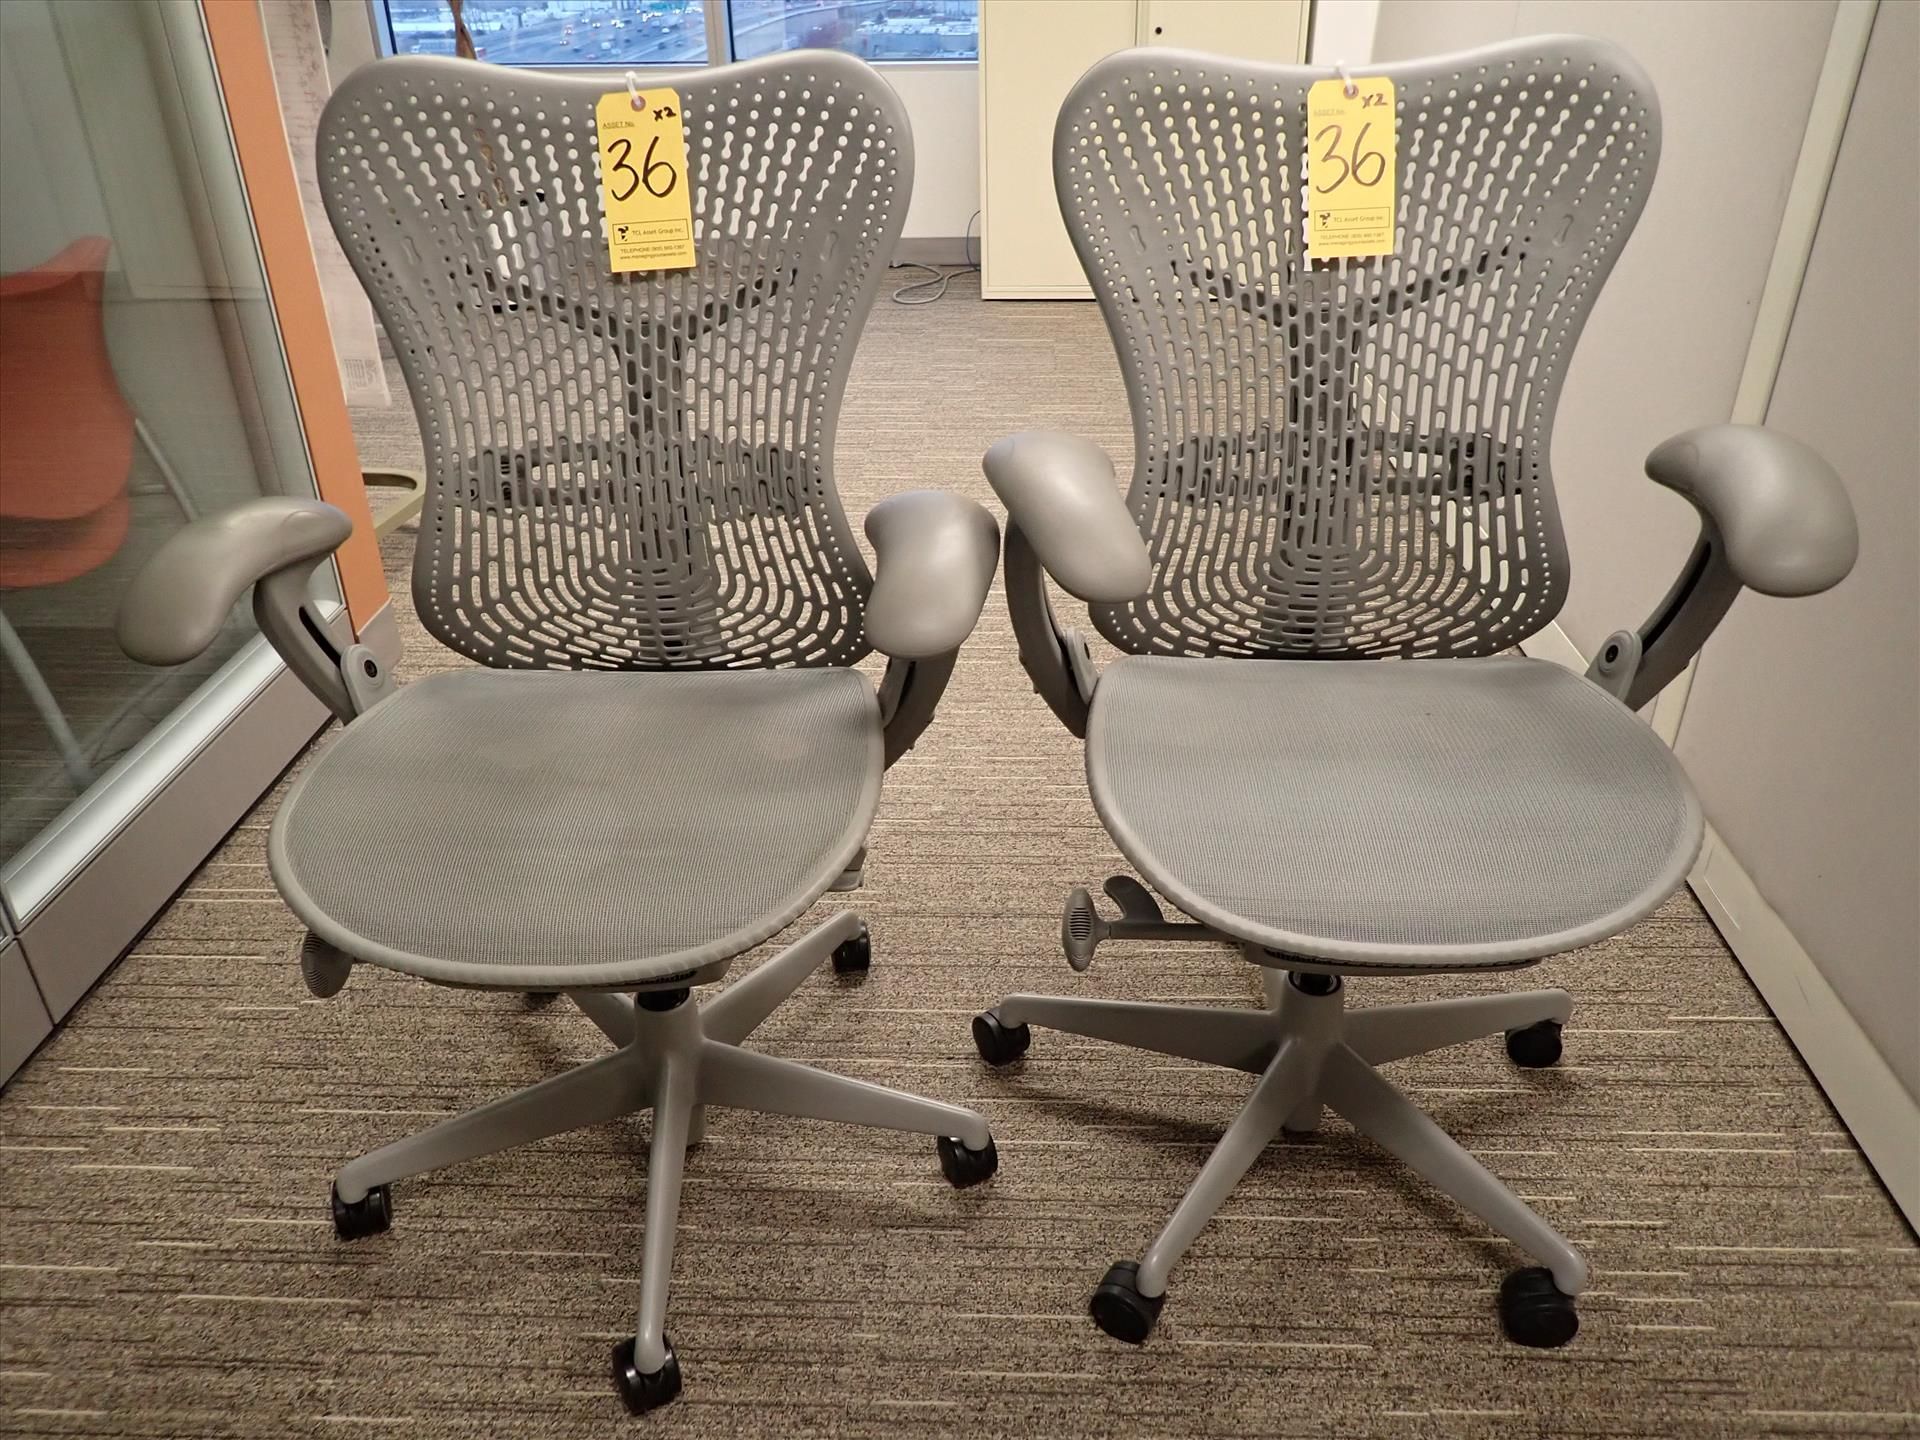 Herman Miller Mirra task chairs; adjustable height, arms, lumbar support, tilt seat and back,